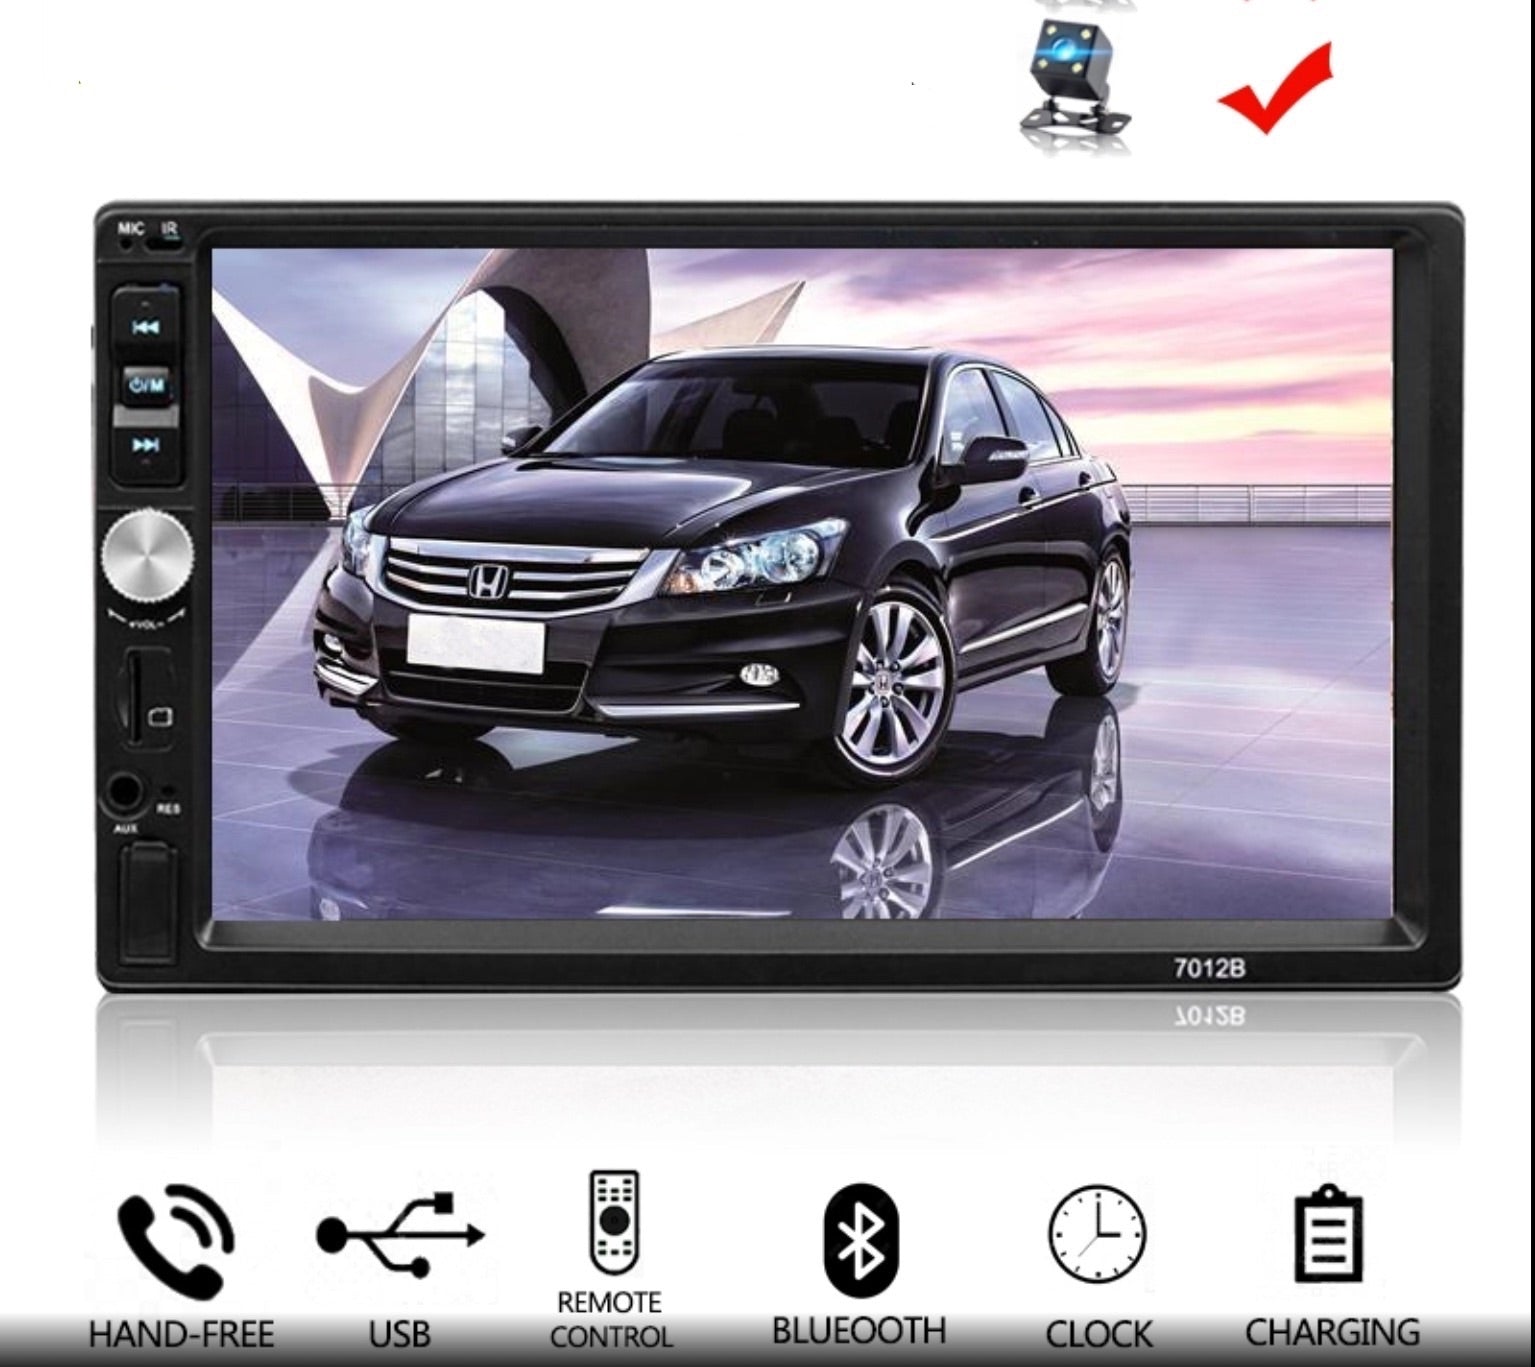 Car Stereo 2 DIN 7 inch Head Unit with Rear View Camera, Bluetooth